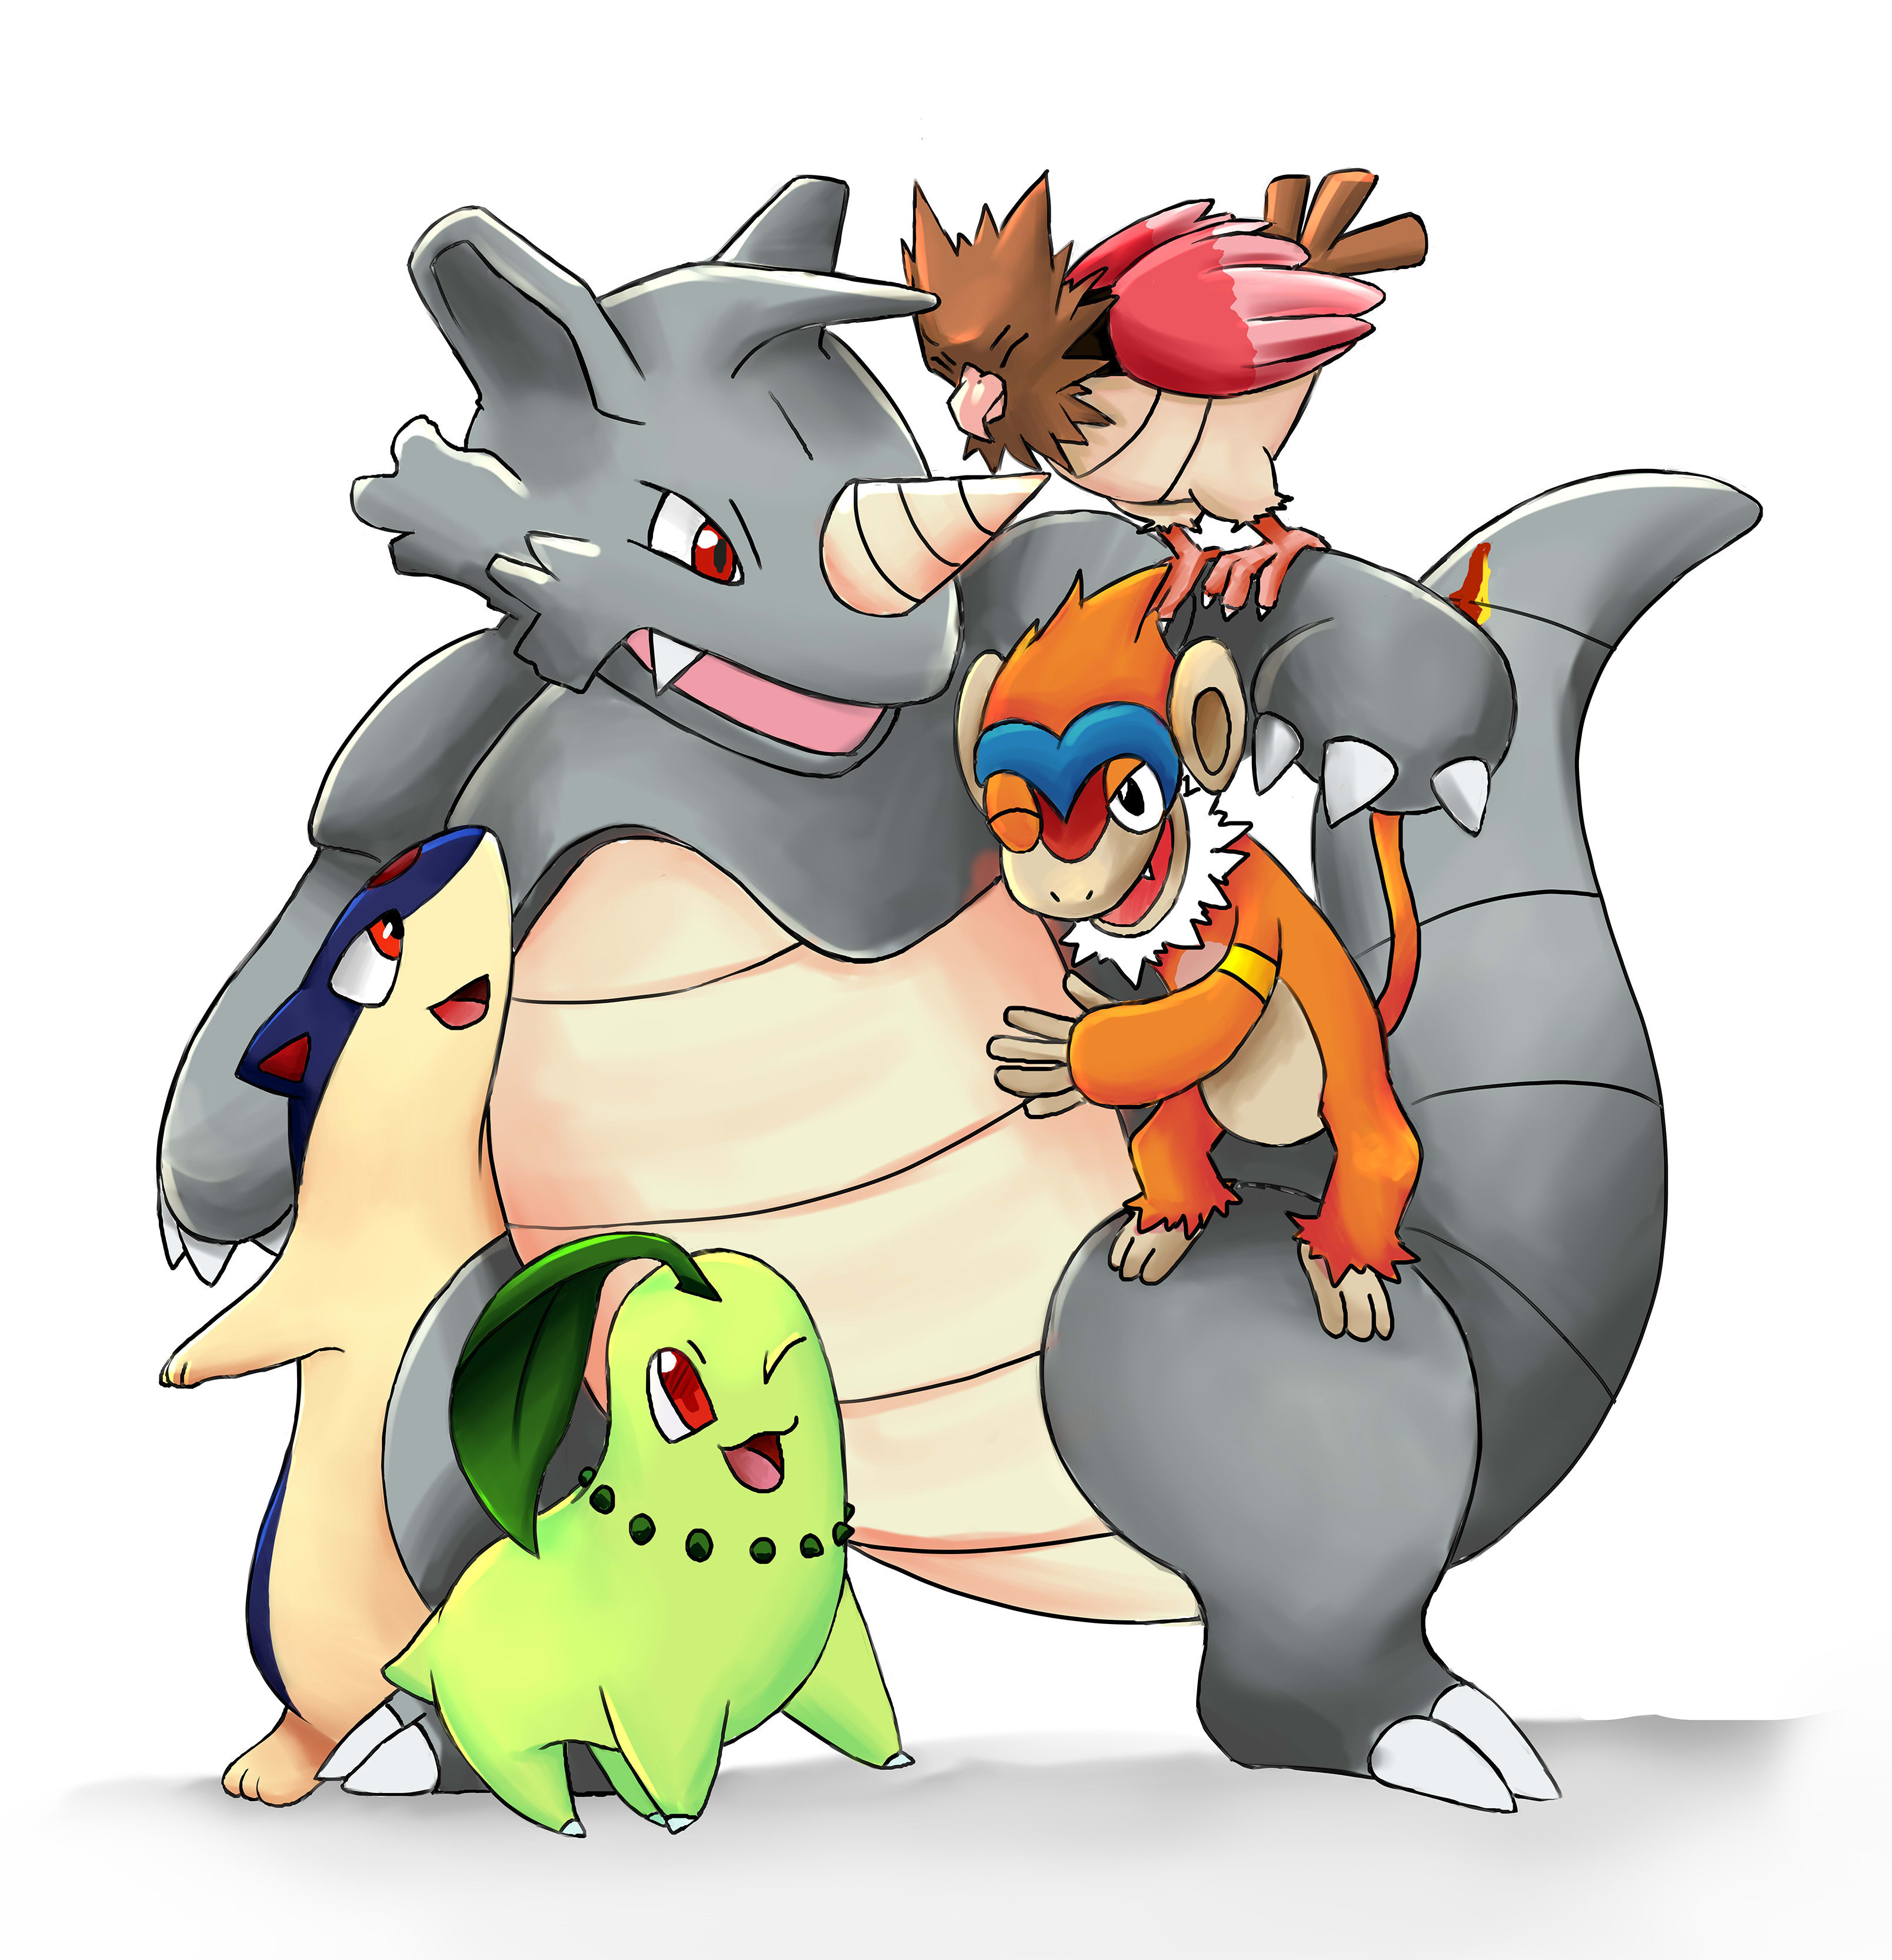 Draw you with your pokémon team by Ash_agnes